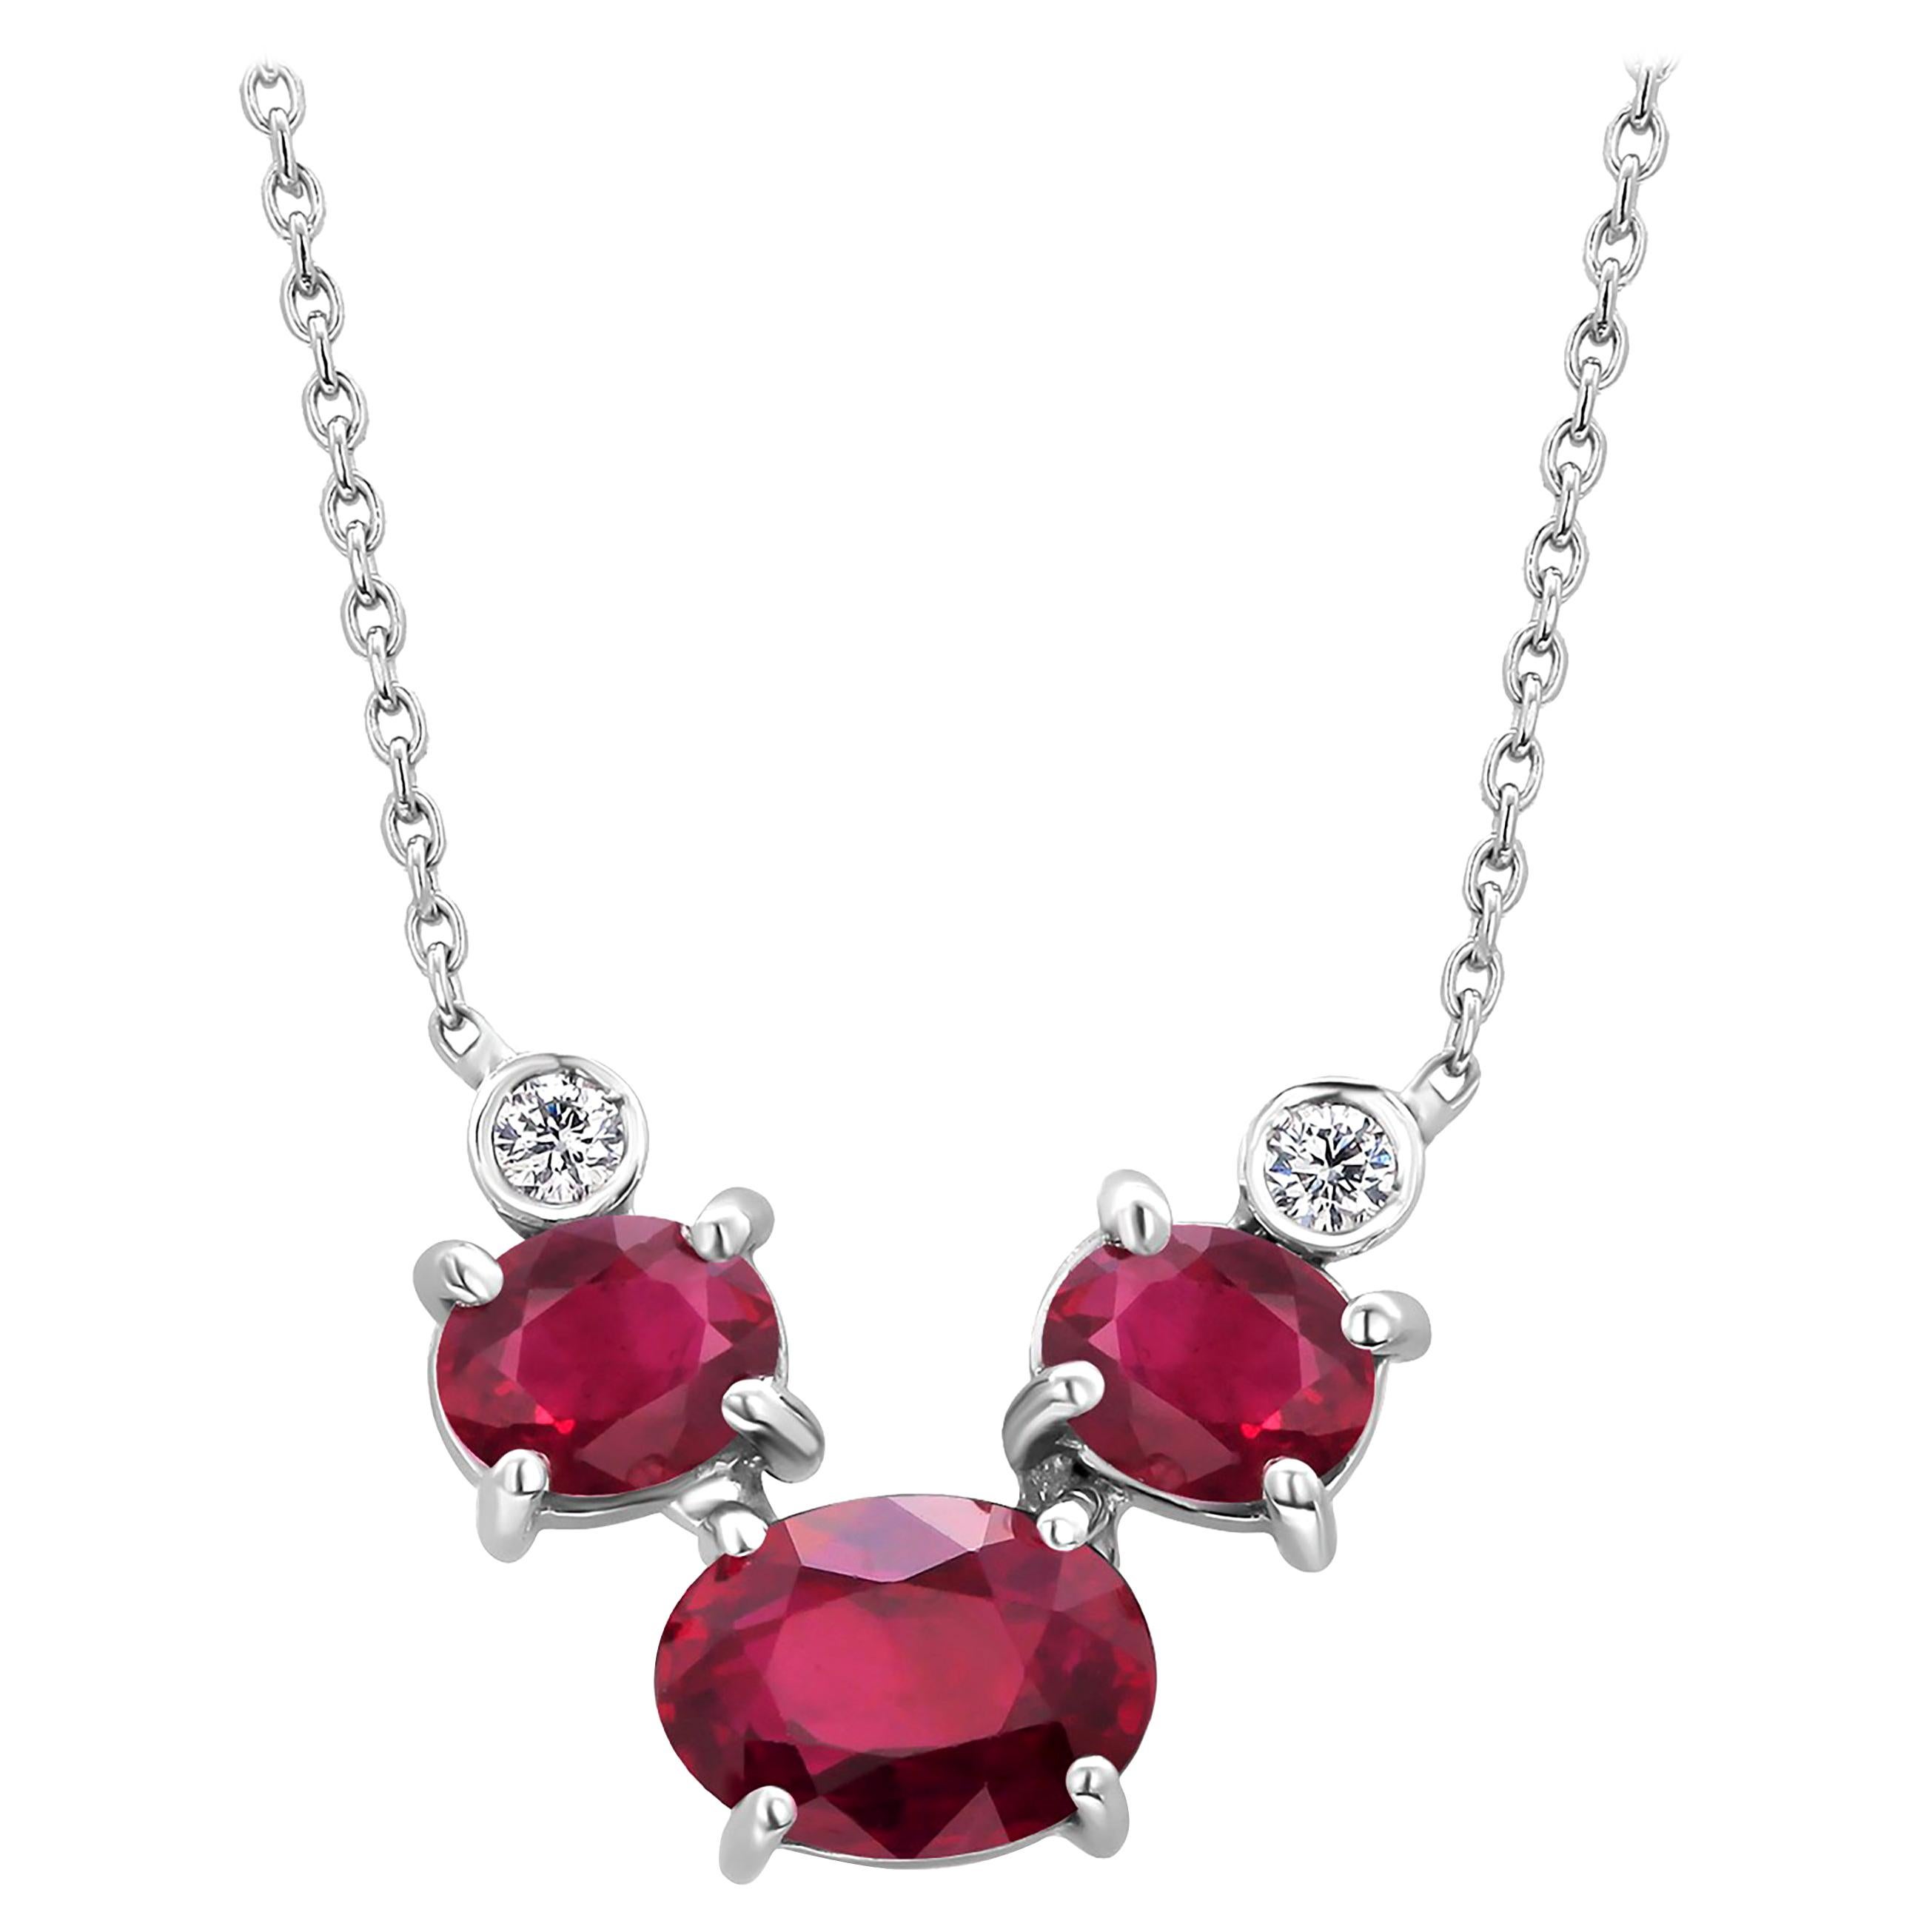 Three Oval Burma Red Rubies and Two Bezel Diamonds Rubies Gold Pendant Necklace